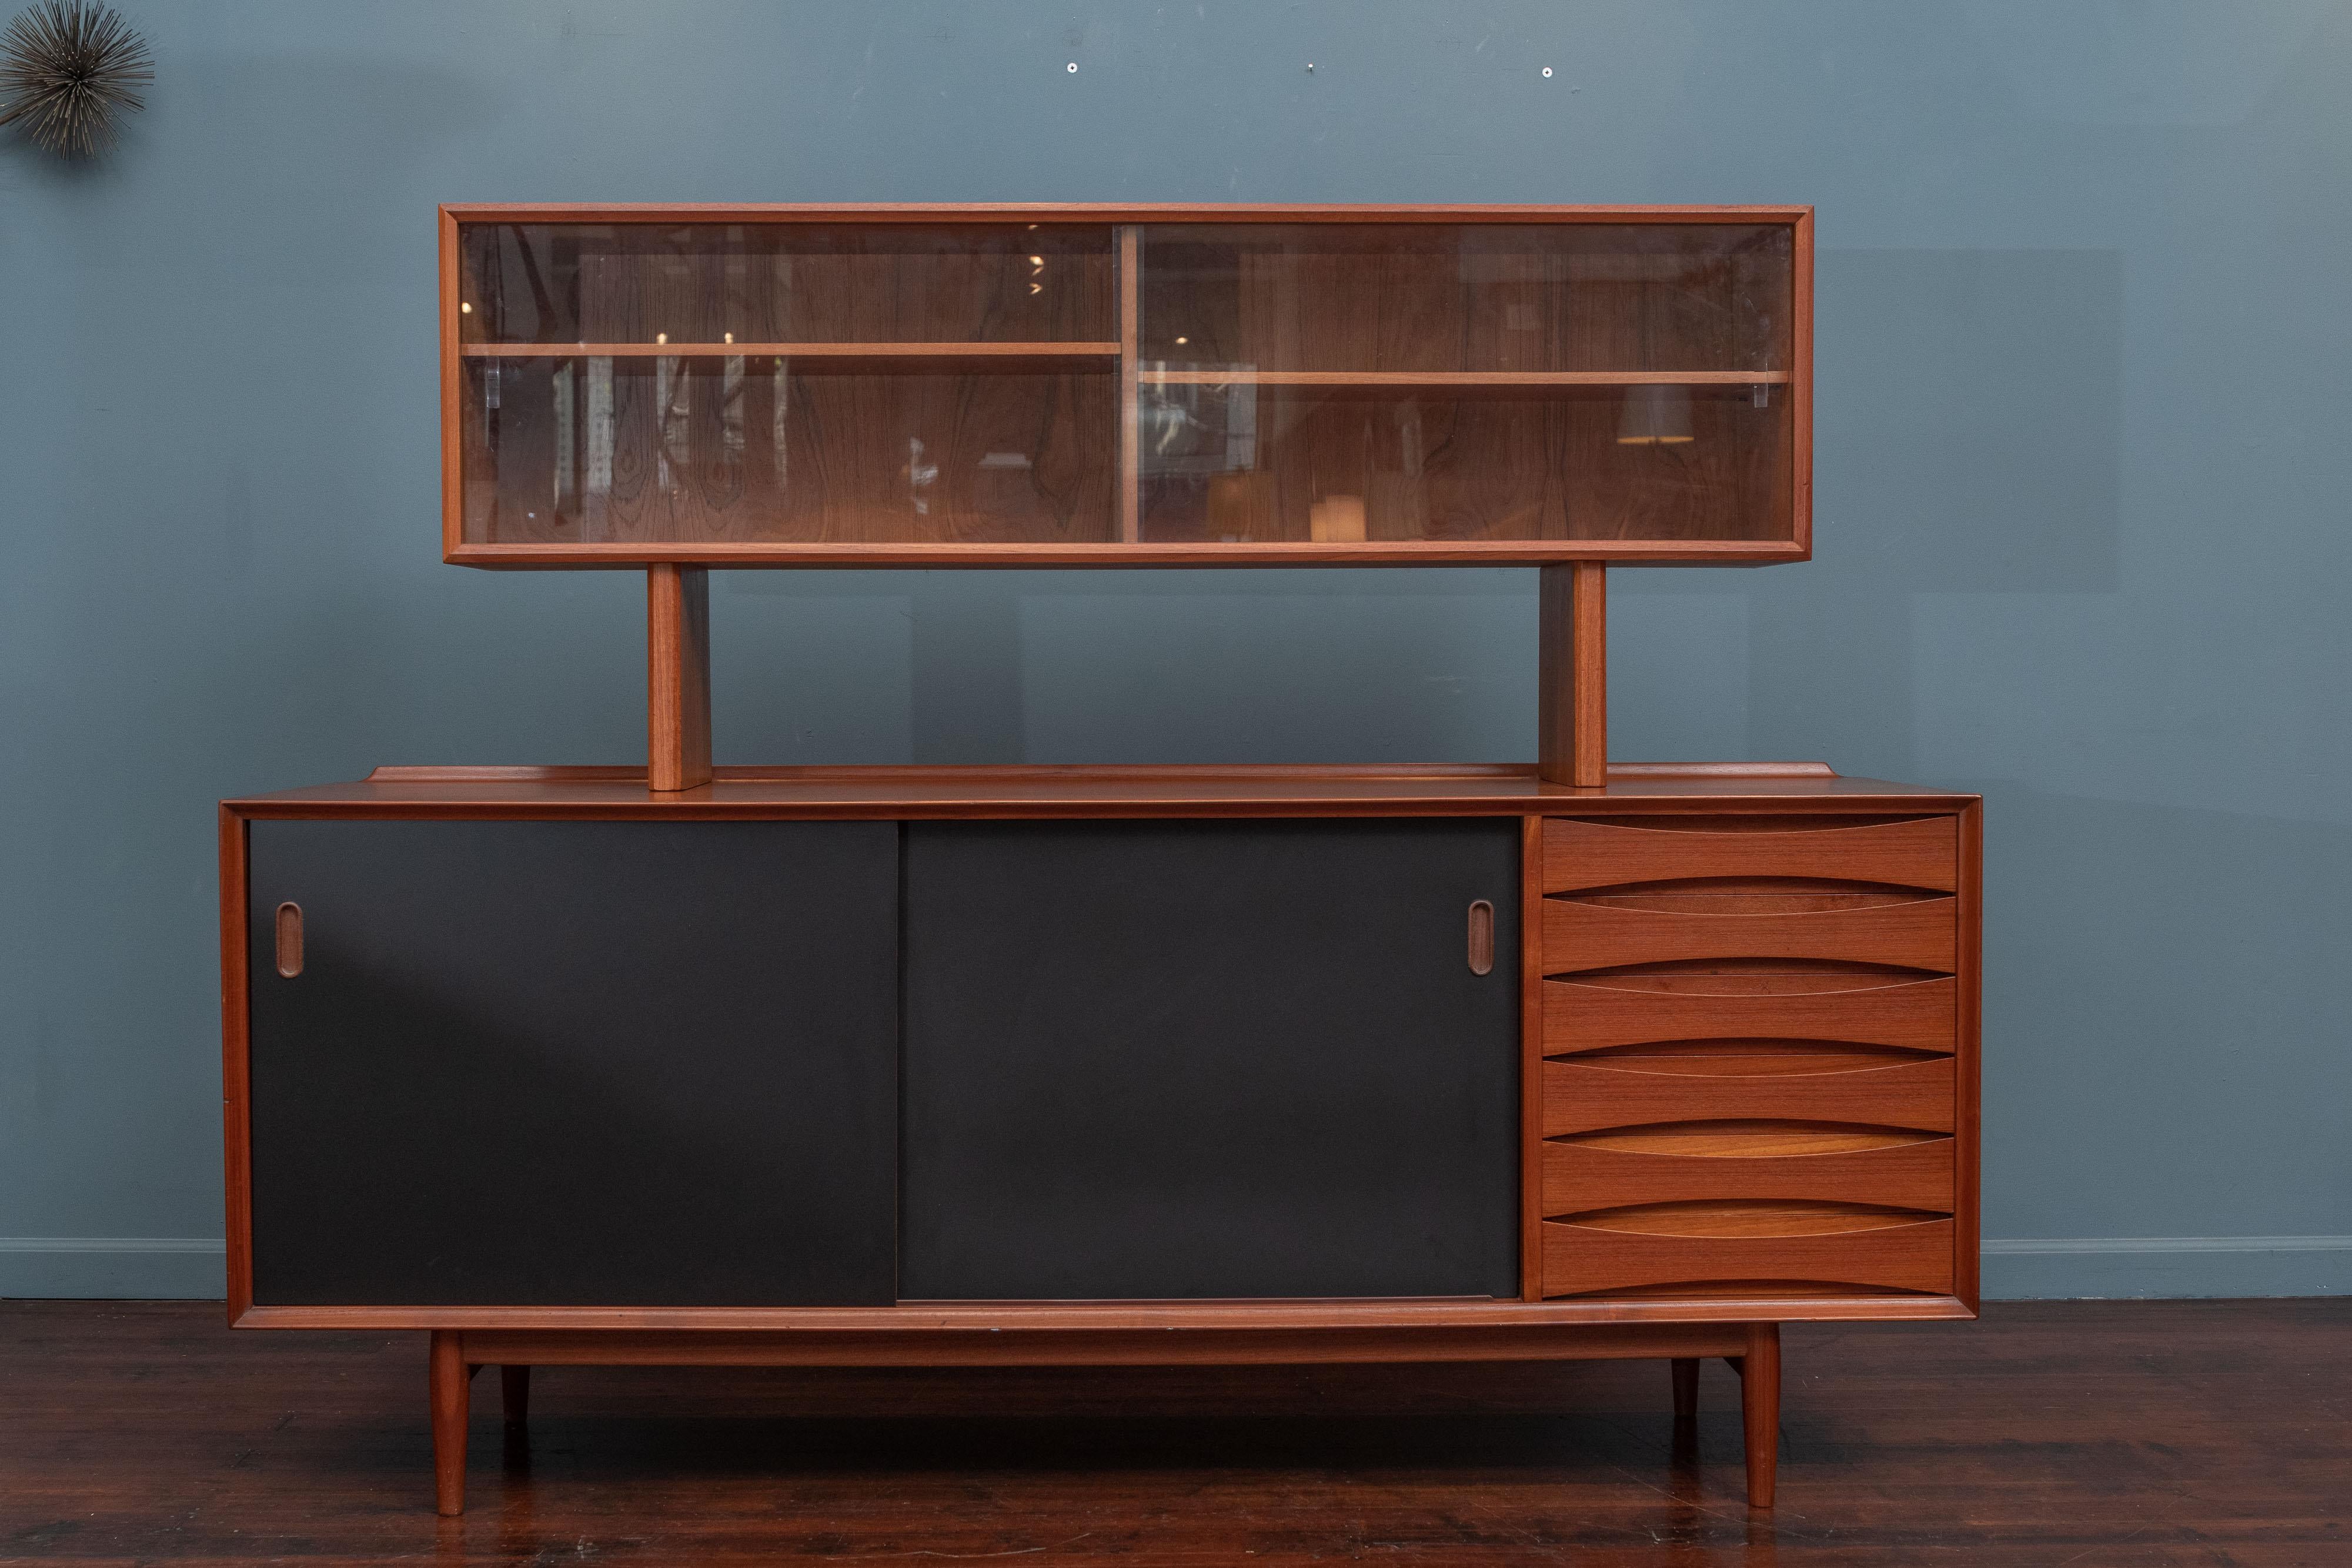 Arne Vodder design credenza Model 29, for Sibast. The doors are reversible with newly painted matte black lacquer on one side and teak on the other. 
The credenza has six drawers with three adjustable shelves. The beautiful bowtie front drawers are